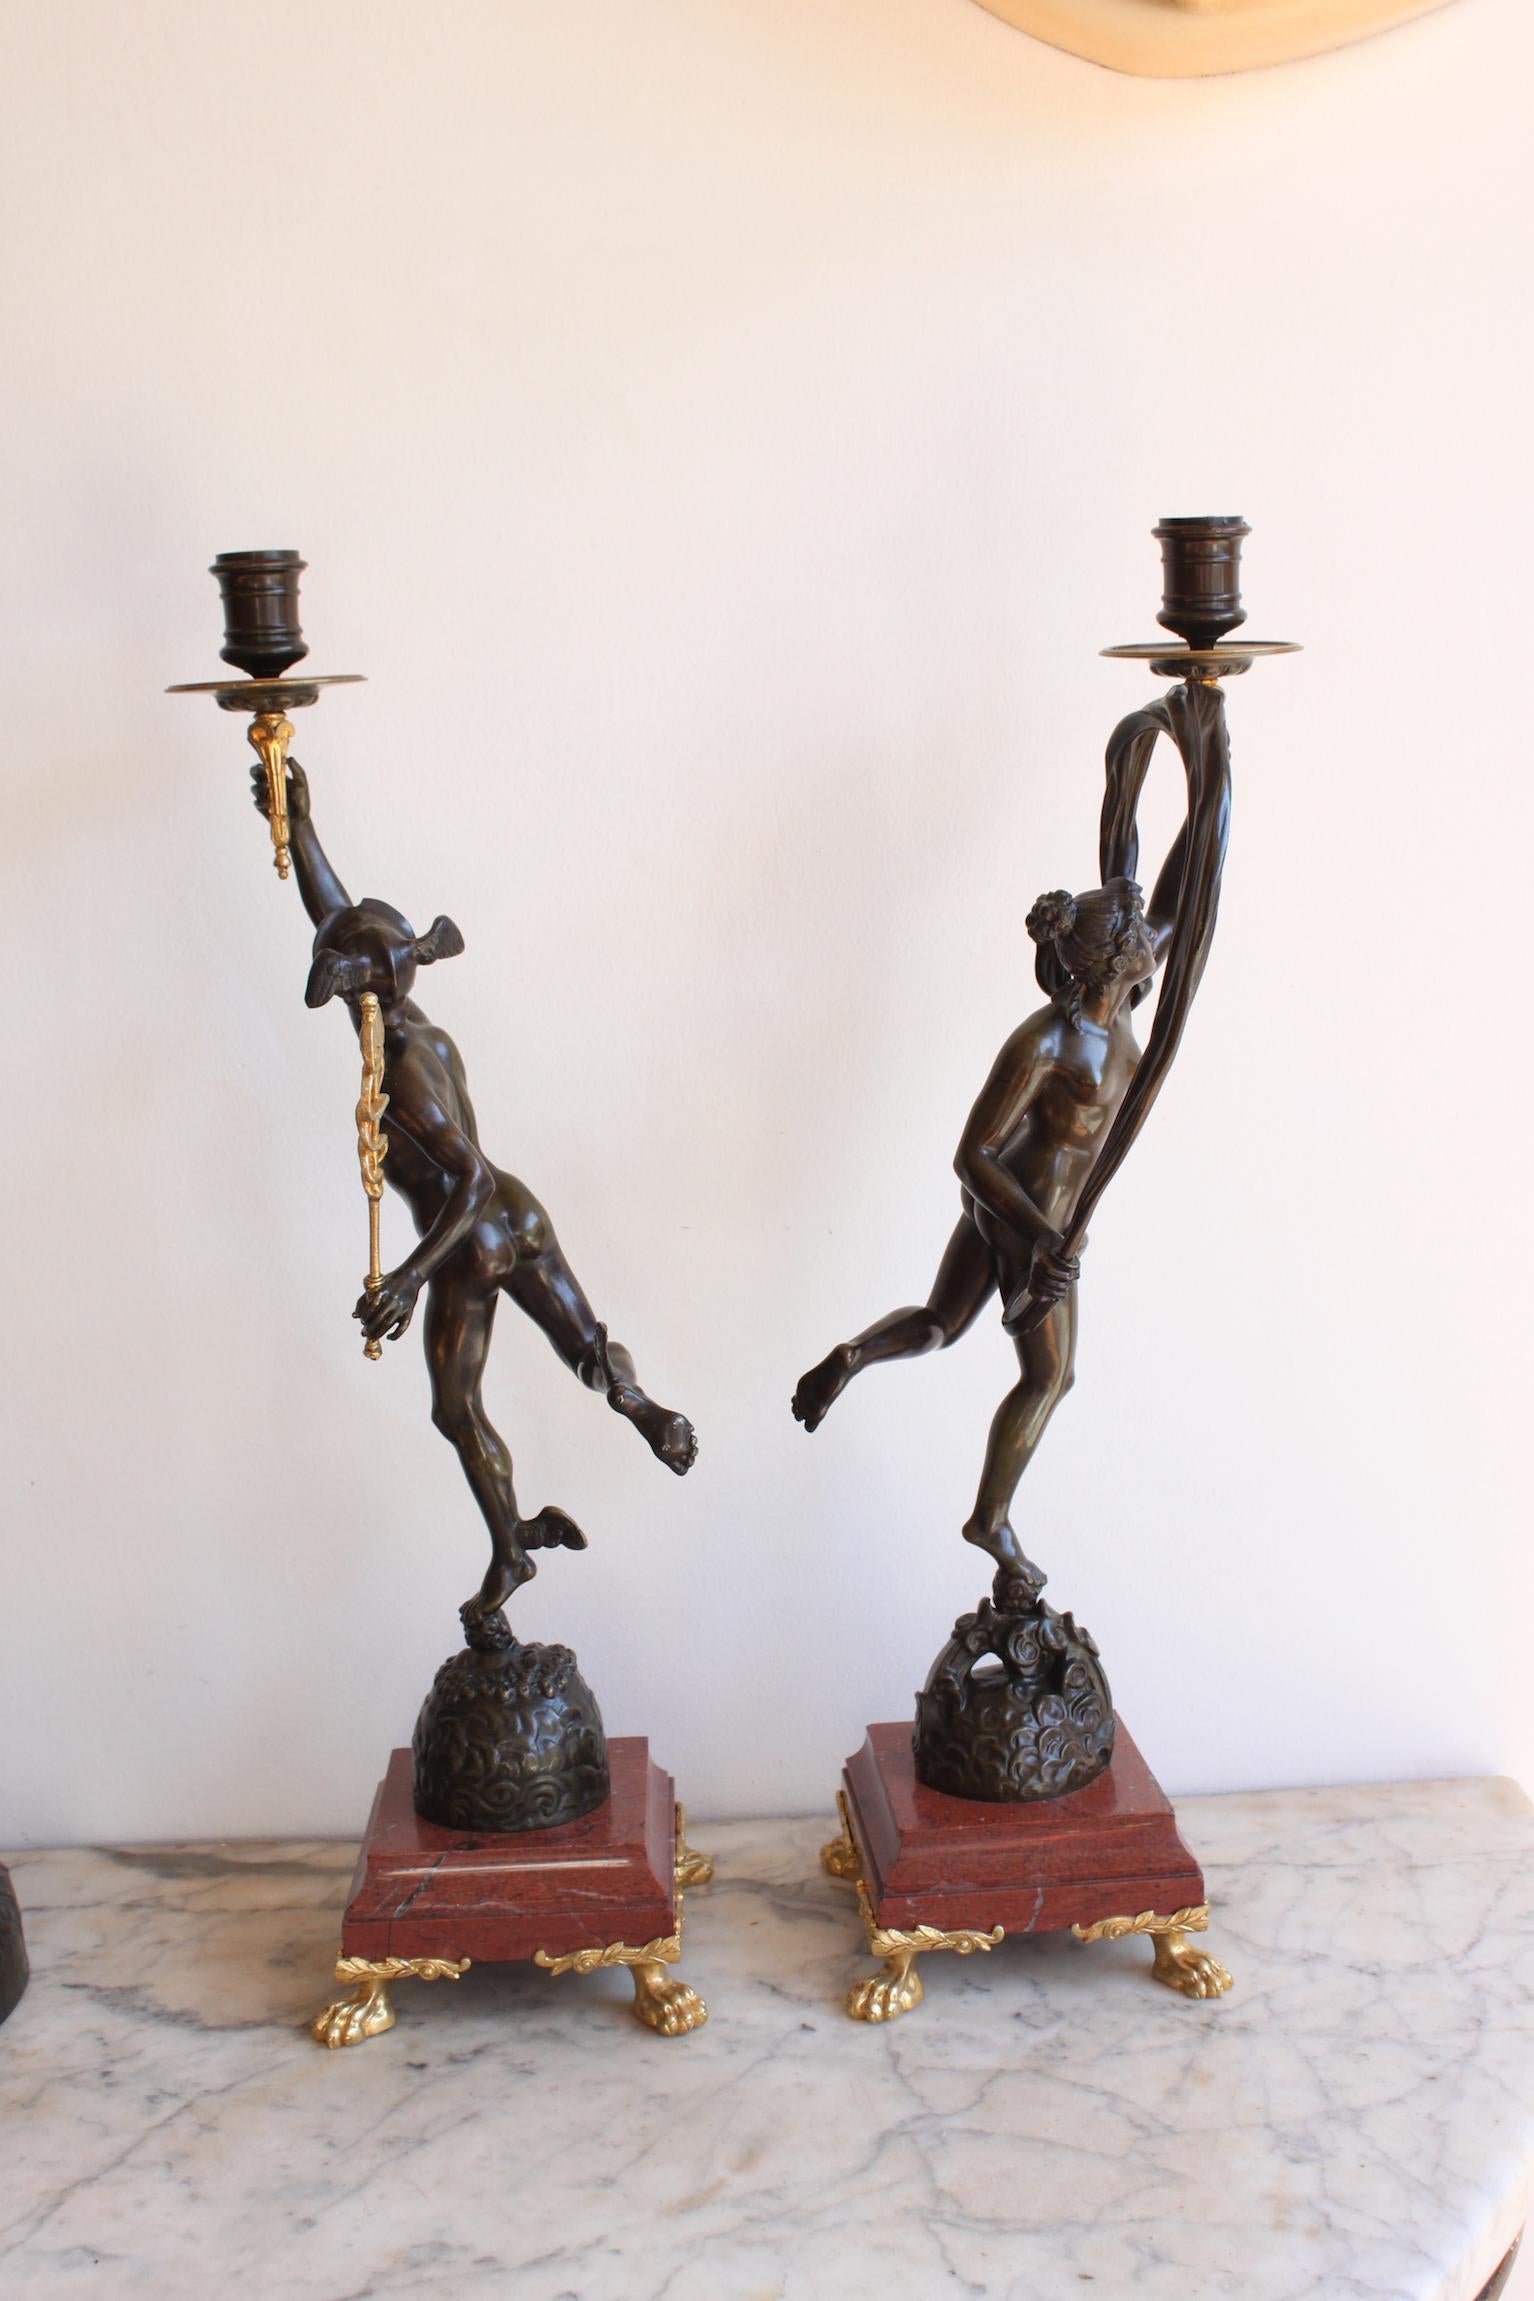 A 19th century pair of candelabras in patinated bronze and gilded attributes, representing two mythological figures including Hermès.
Good condition
Dimensions: Height 50 cm, width 12 cm, depth 12 cm.